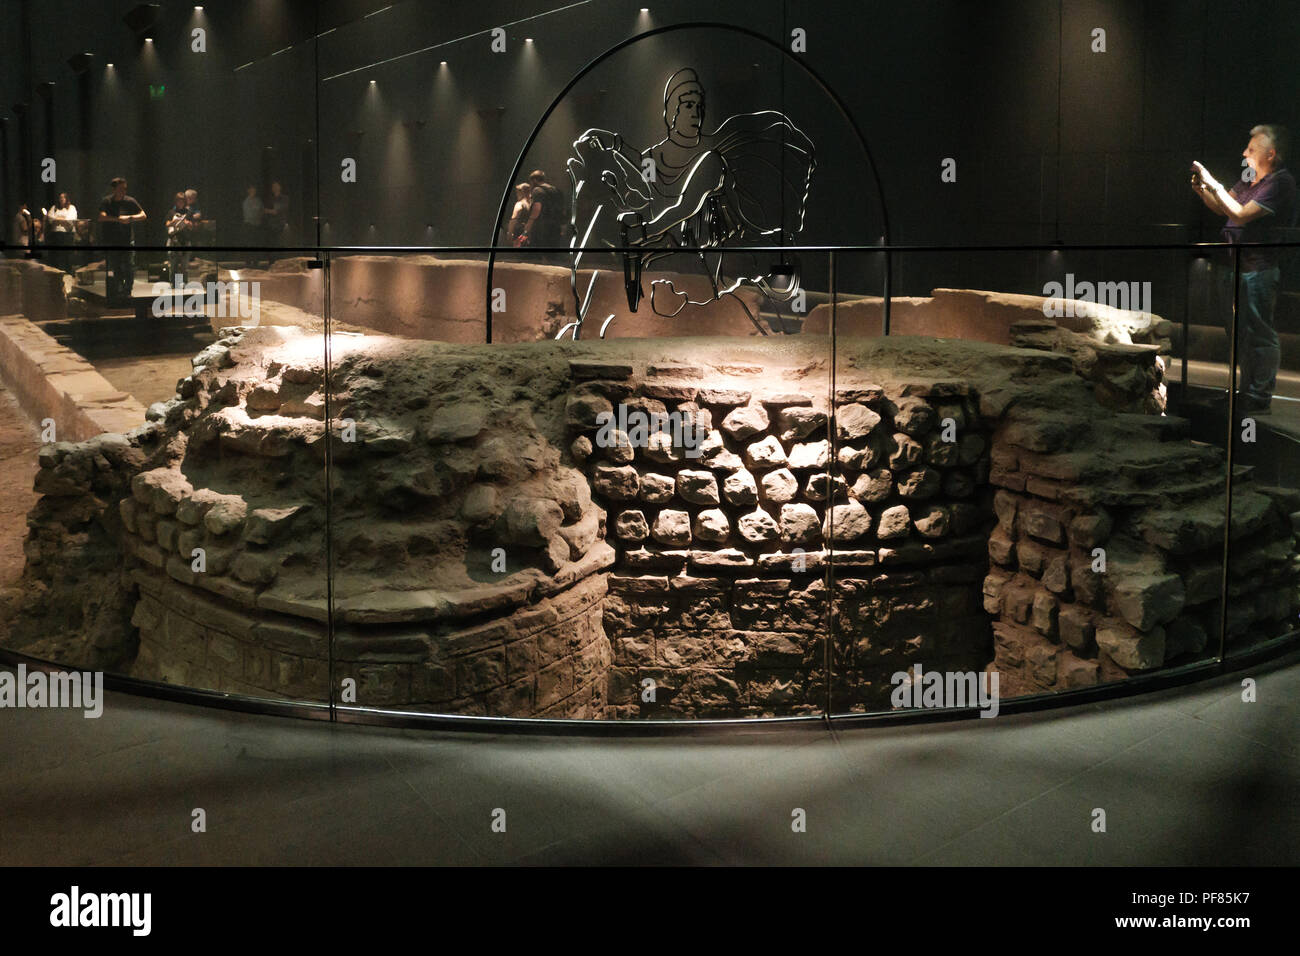 Internal view of the Roman Temple of Mithras, London Mithraeum, Walbrook, City of London, under the Bloomberg European Headquarters building. Stock Photo